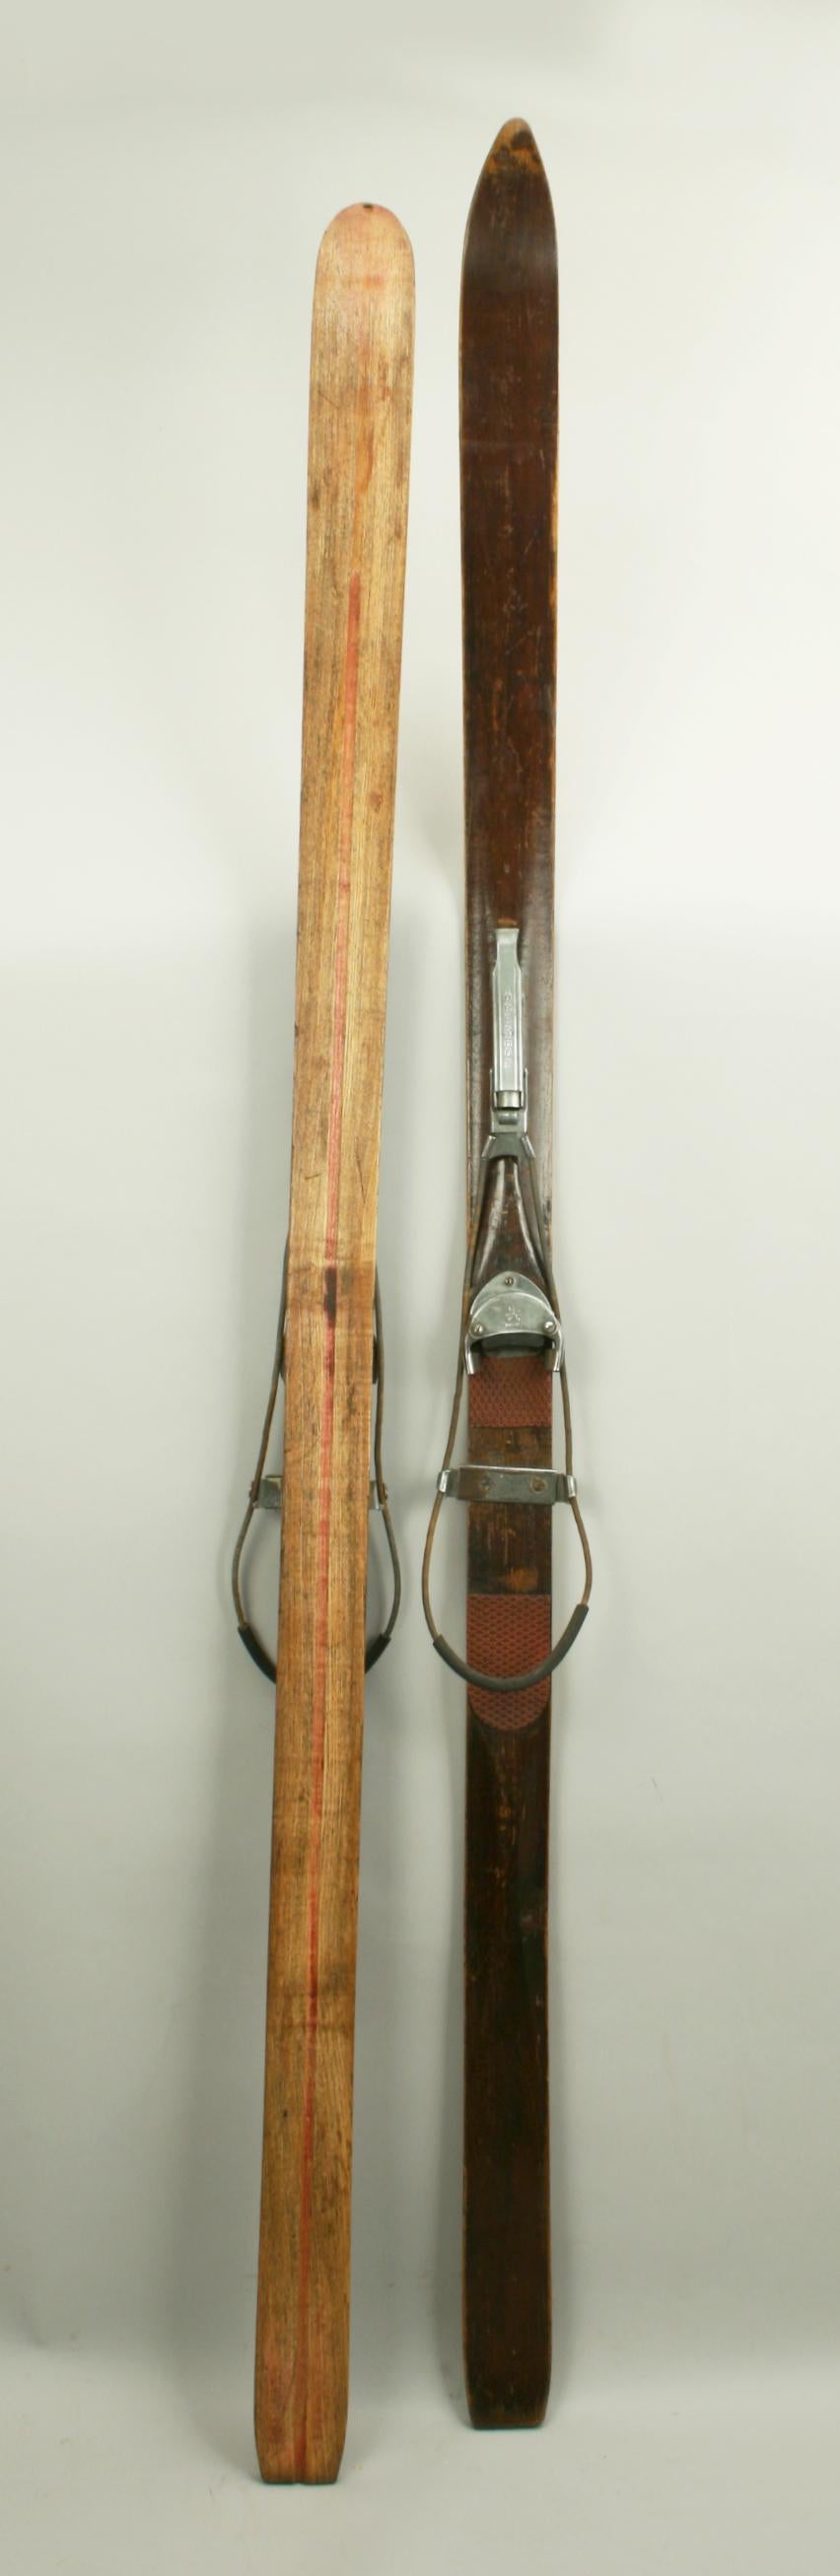 Sporting Art Antique Ash Skis with Unique Oberhof Safety Bindings, Telemark Museum piece.